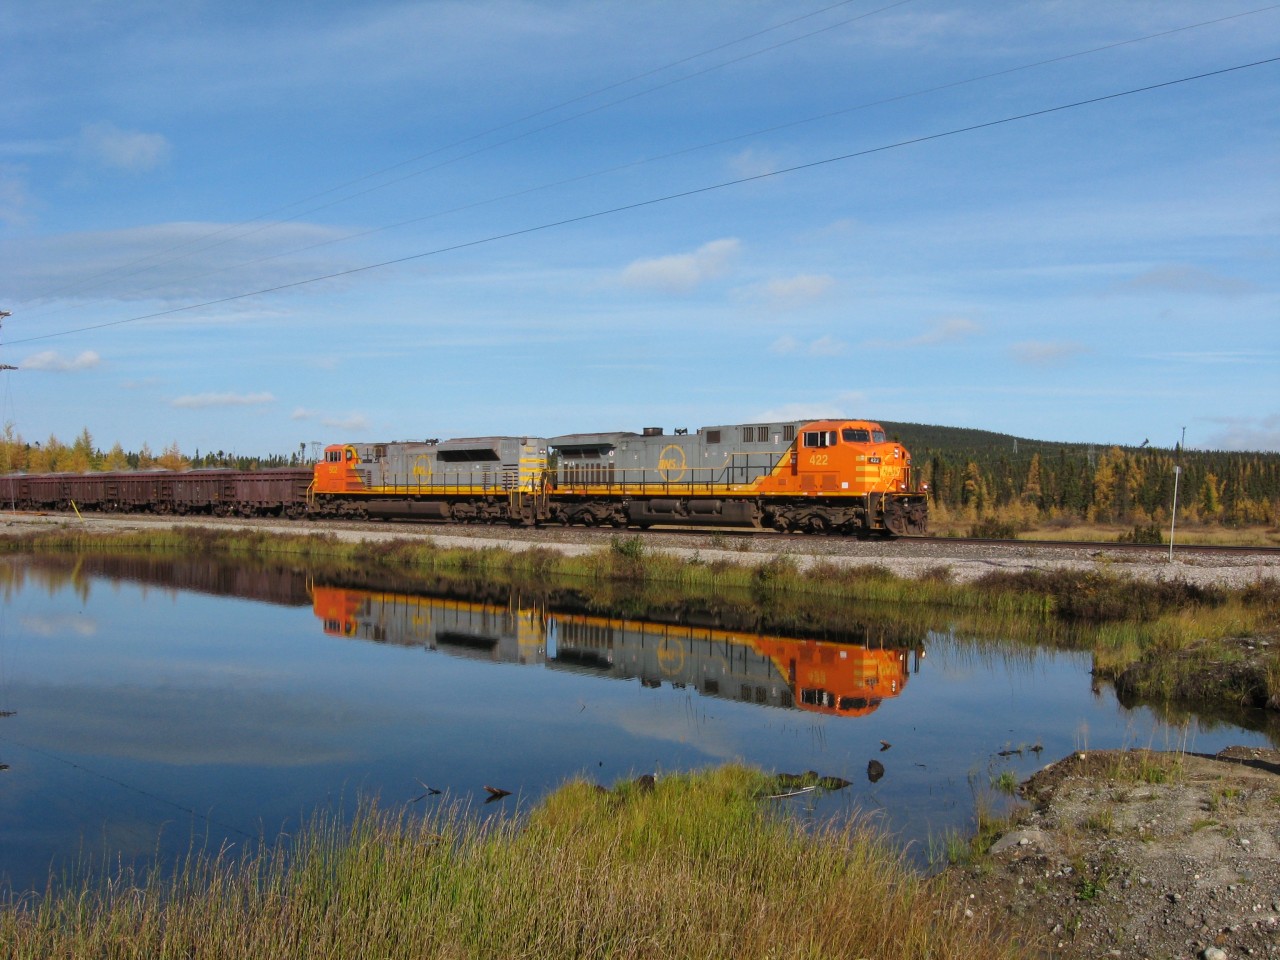 An almost picture perfect reflection of a typical QNS&L ore train about to cross Highway 500, the Trans Labrador Highway, on a crisp early October morning. Having just left Labrador City, lead unit AC4400 # 422 and SD70 # 502 will travel some 260 miles to the Port of Sept-Iles. The trains may be gone forever on the Island portion of our Province, but fortunately such is not the case in Labrador, and in fact, may never be.